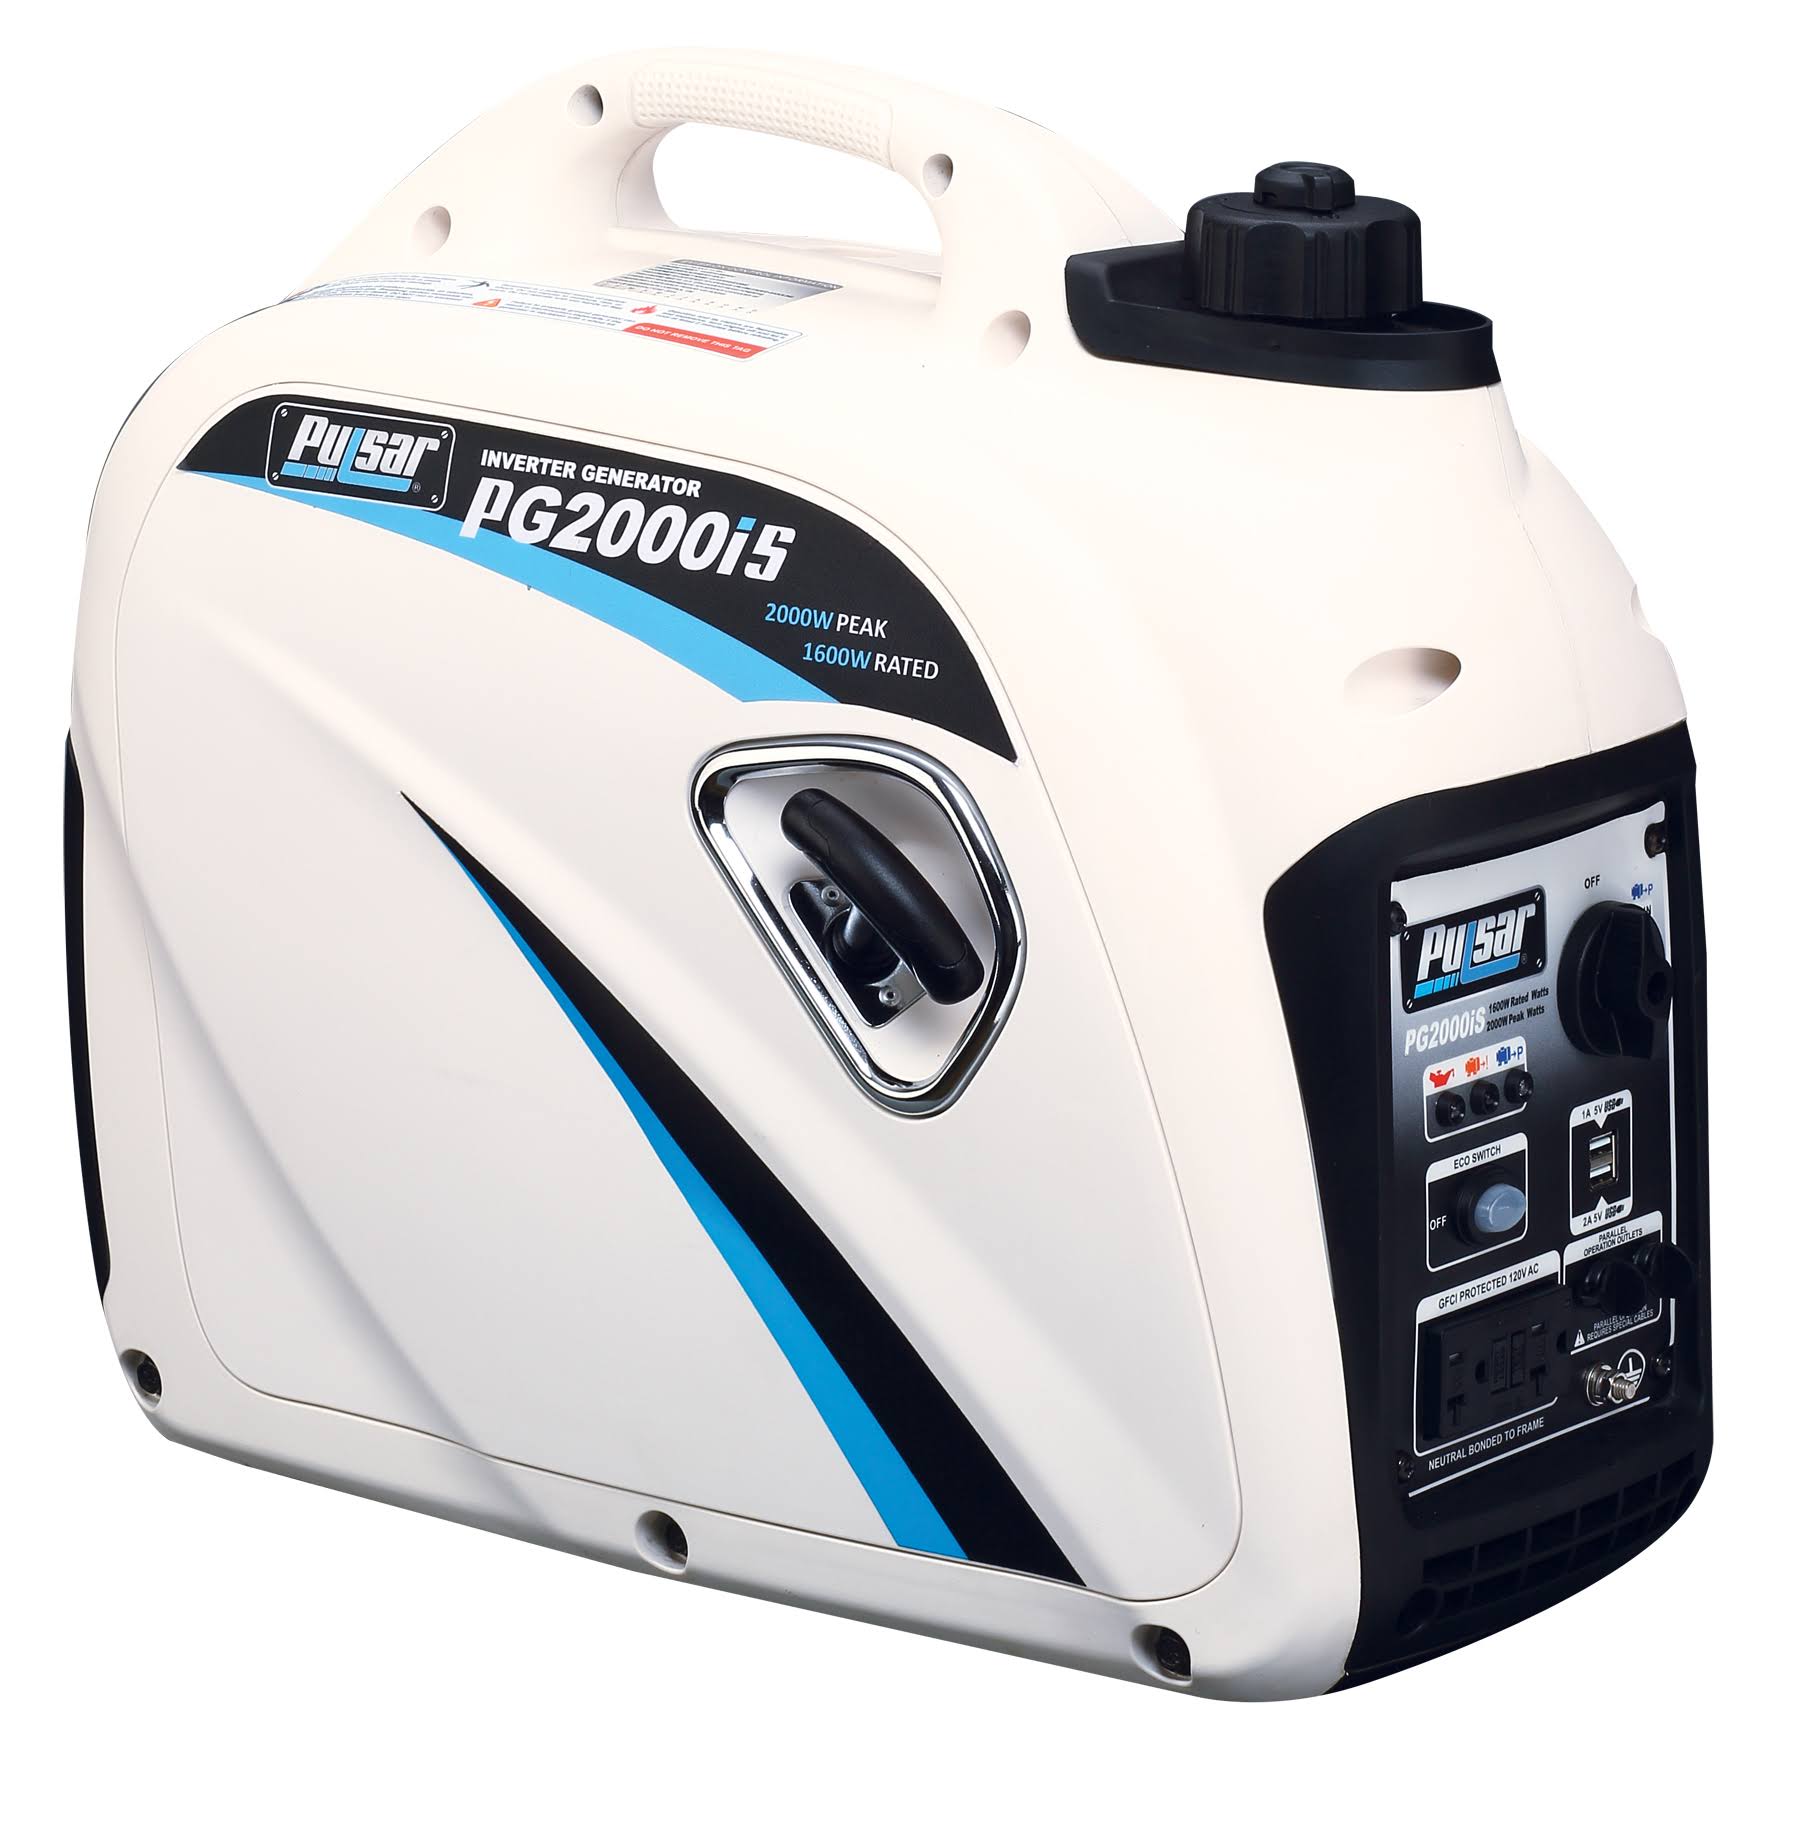 PG2000IS INVERTER 2000W GENERATOR RATED 1600W